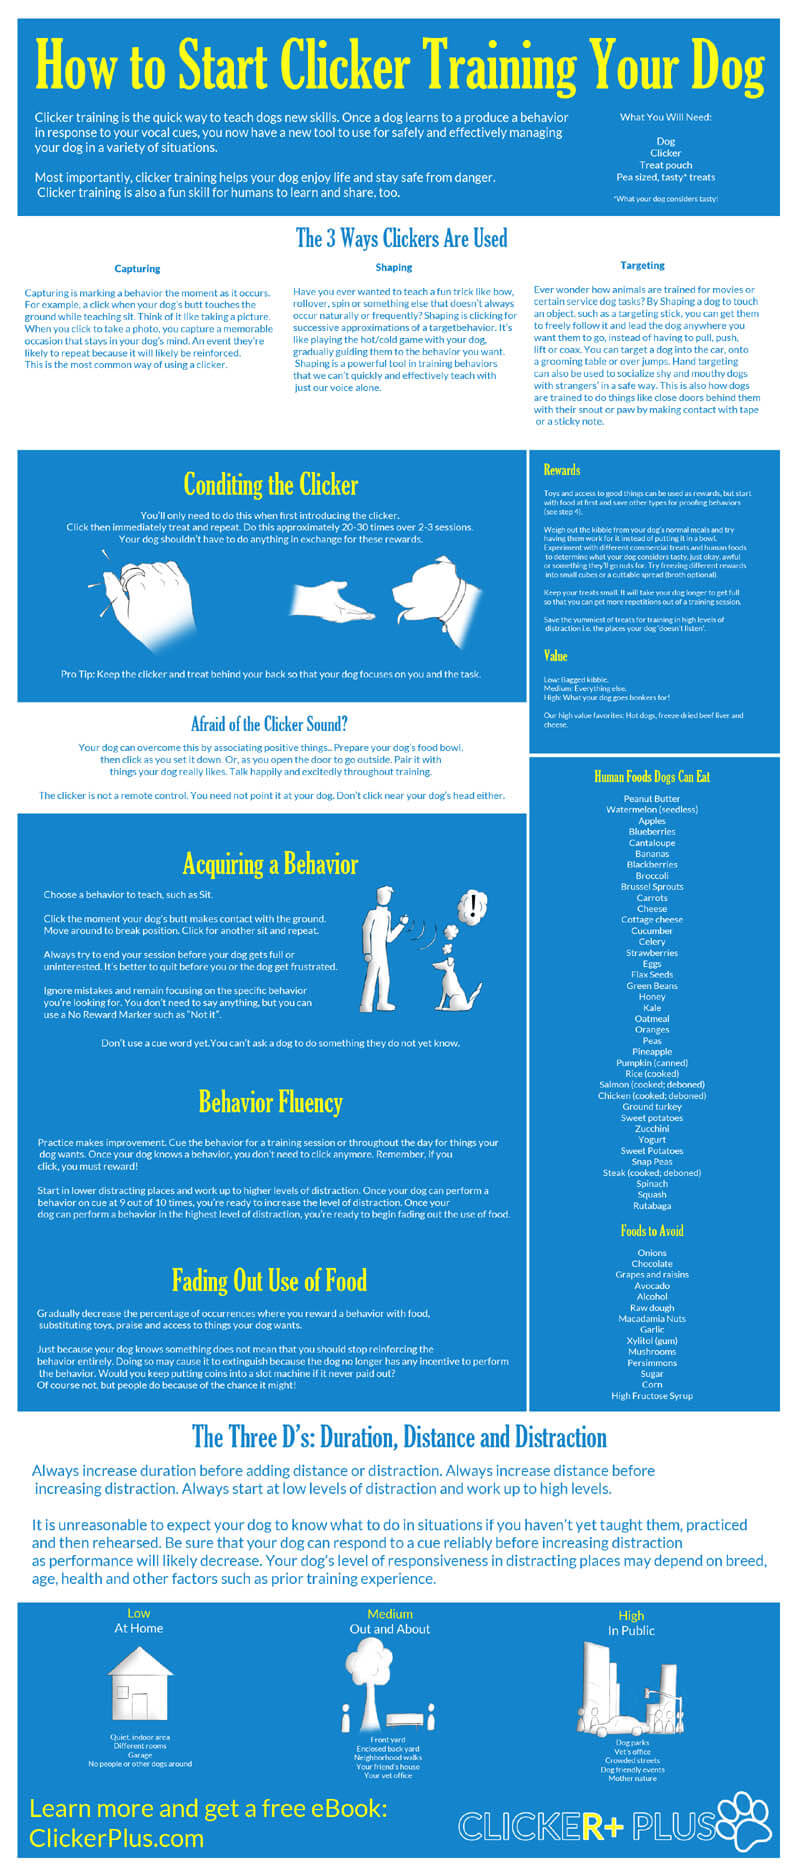 DOG CLICKER TRAINING BASICS INFOGRAPHIC - PRESS TO DOWNLOAD